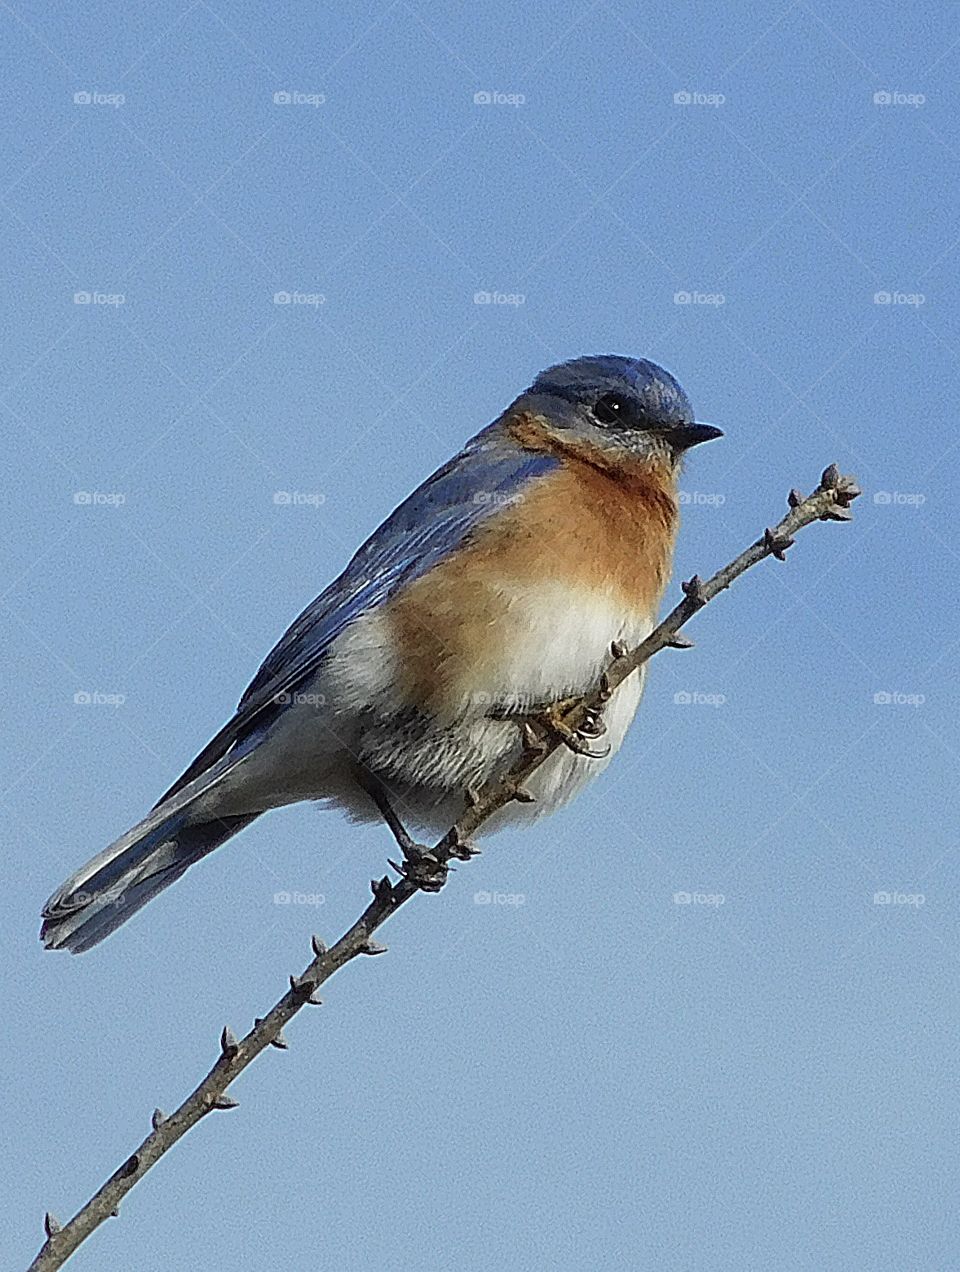 The Eastern Bluebird is a small thrush found in open woodlands, farmlands, and orchards. It is the state bird of Missouri and New York. This species measures 16–21 cm long, spans 25–32 cm across the wings, and weighs 27–34 g. Here he rests on a limb